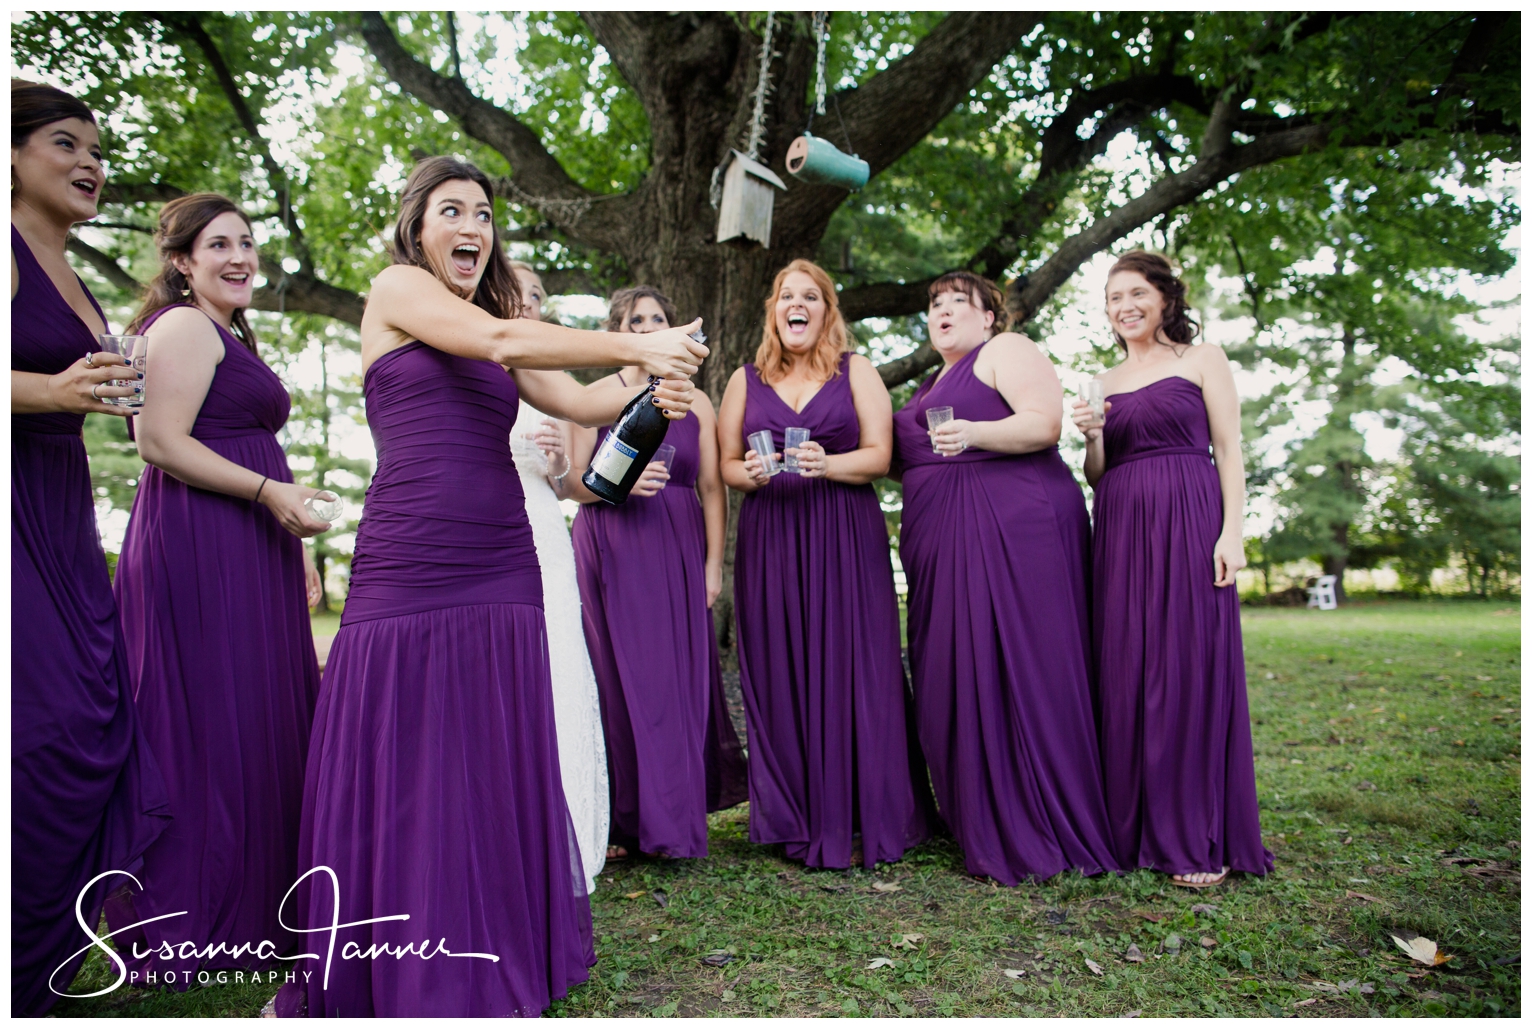 Indianapolis Outdoor Wedding, bridesmaids wearing purple dresses pooping champagne bottle